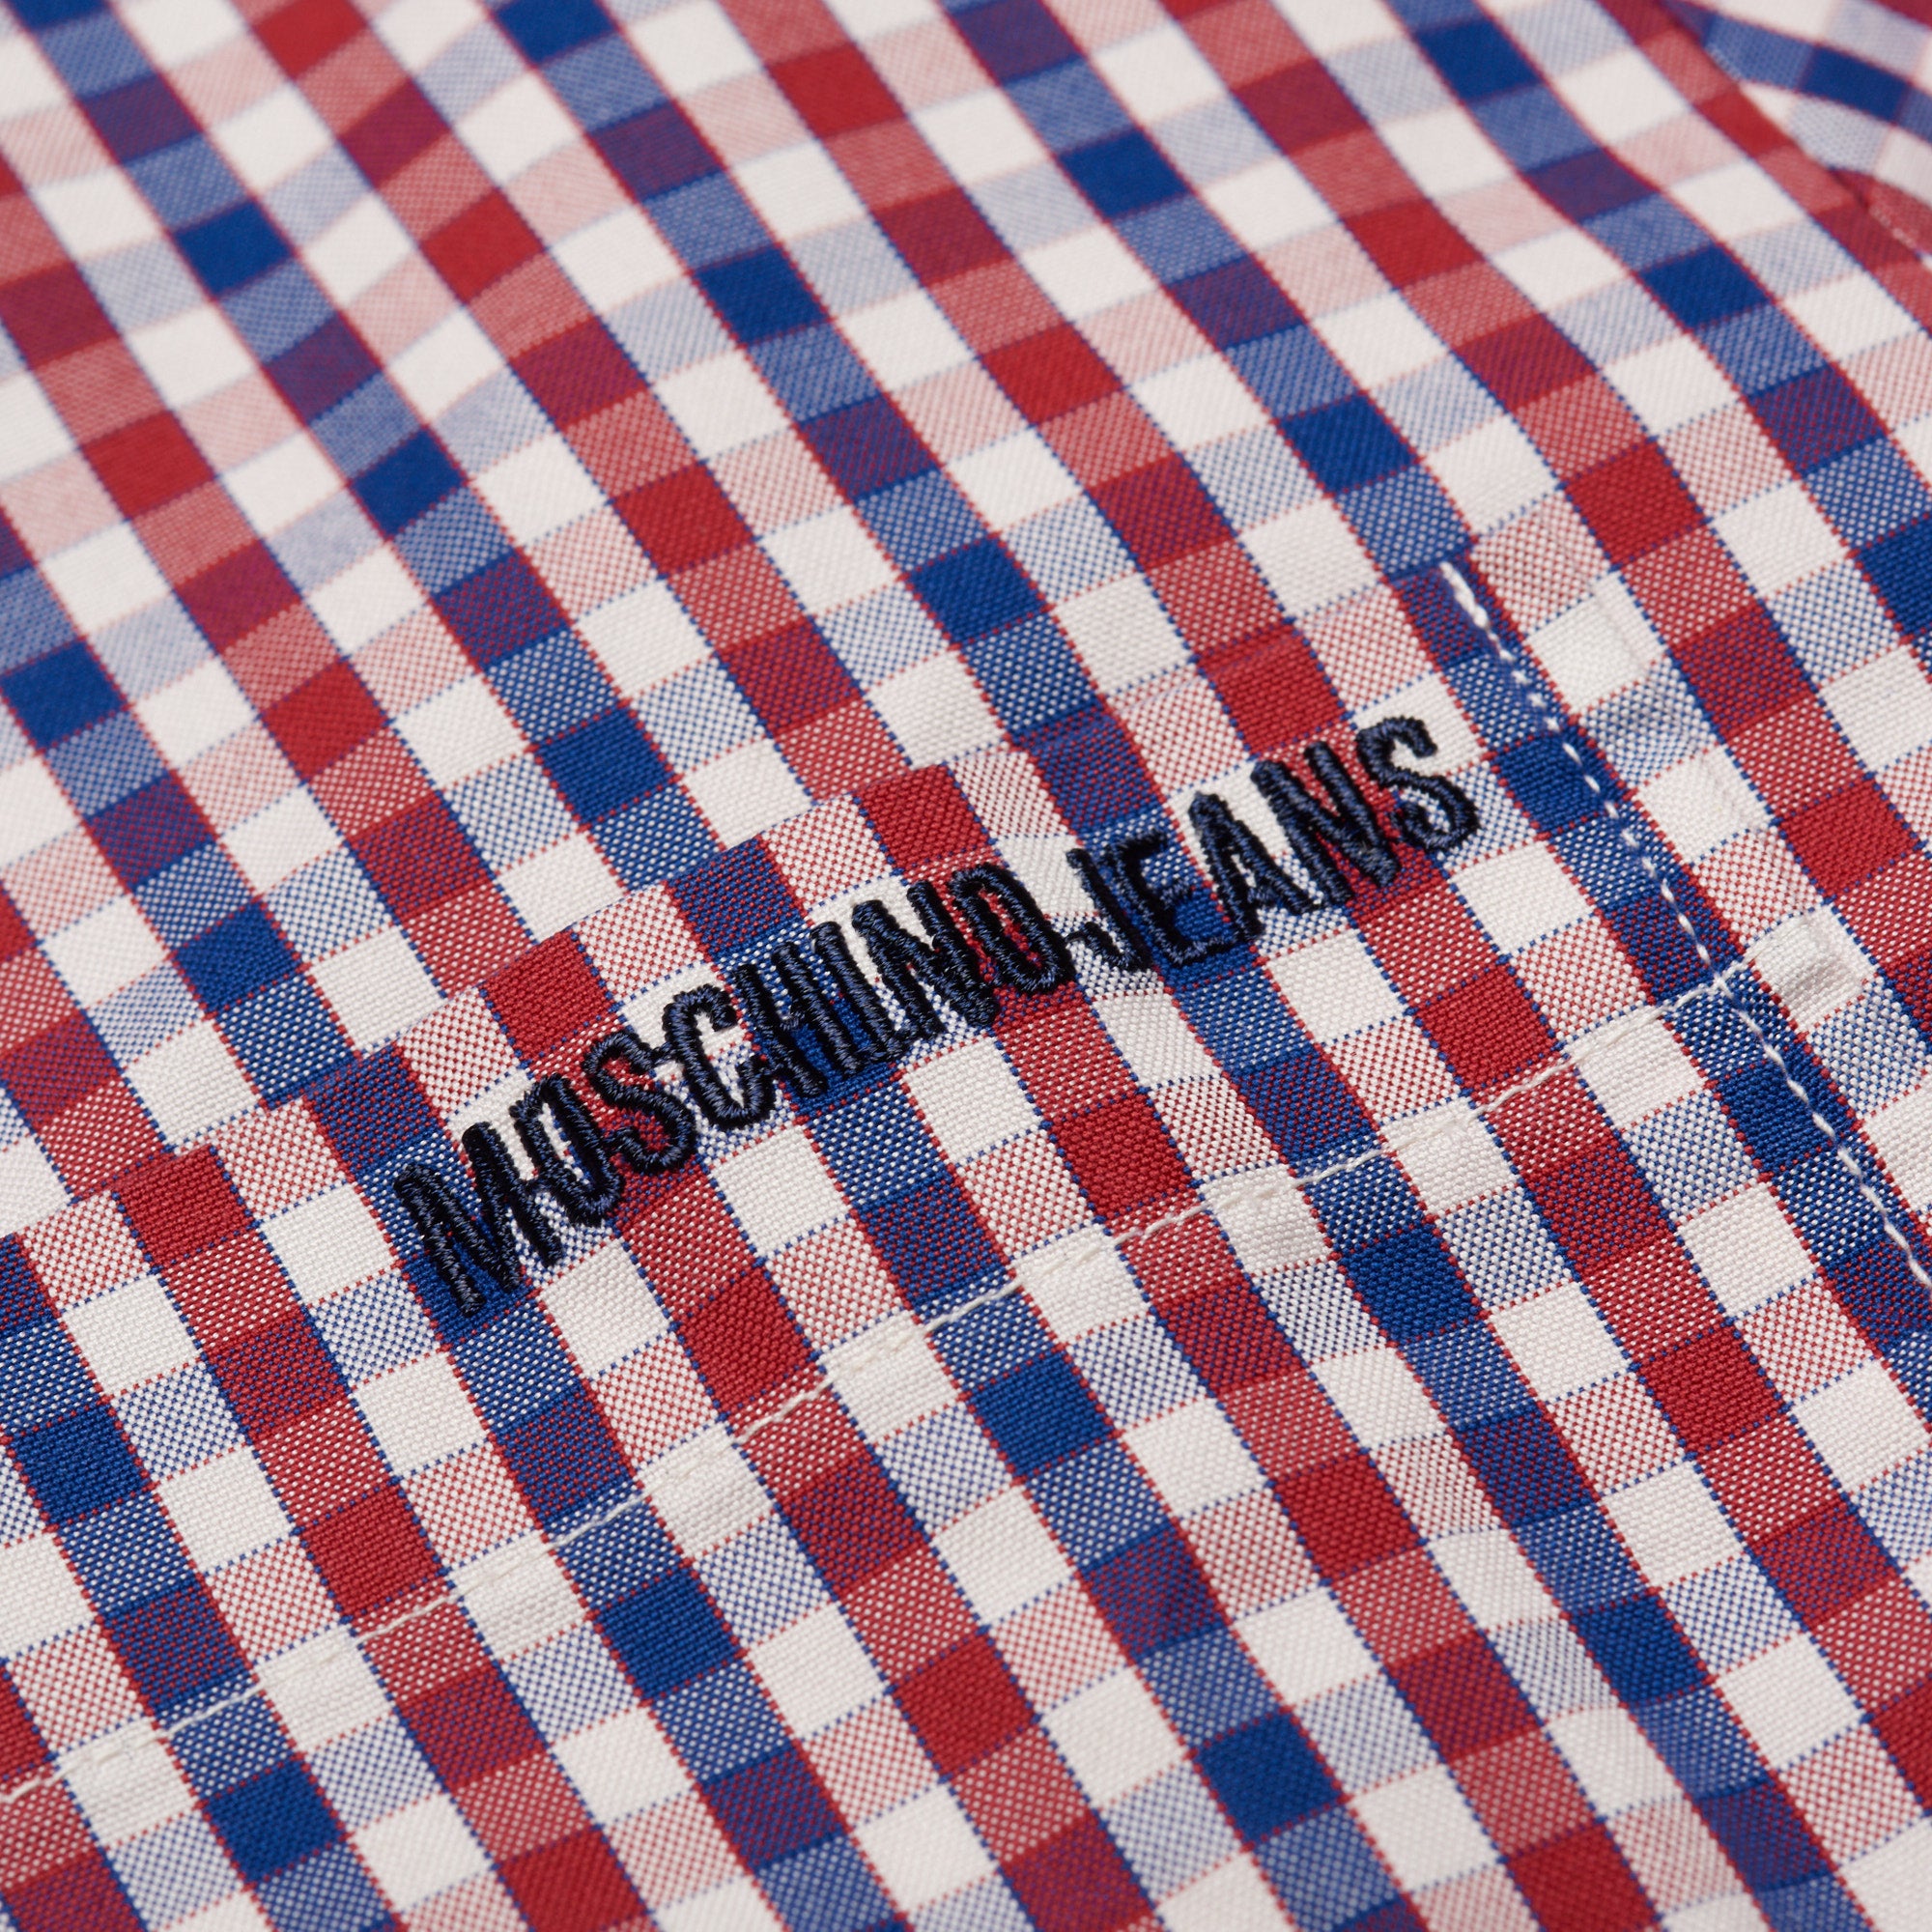 MOSCHINO Jeans Red-Blue Gingham Check Cotton Slim Fit Casual Shirt US M